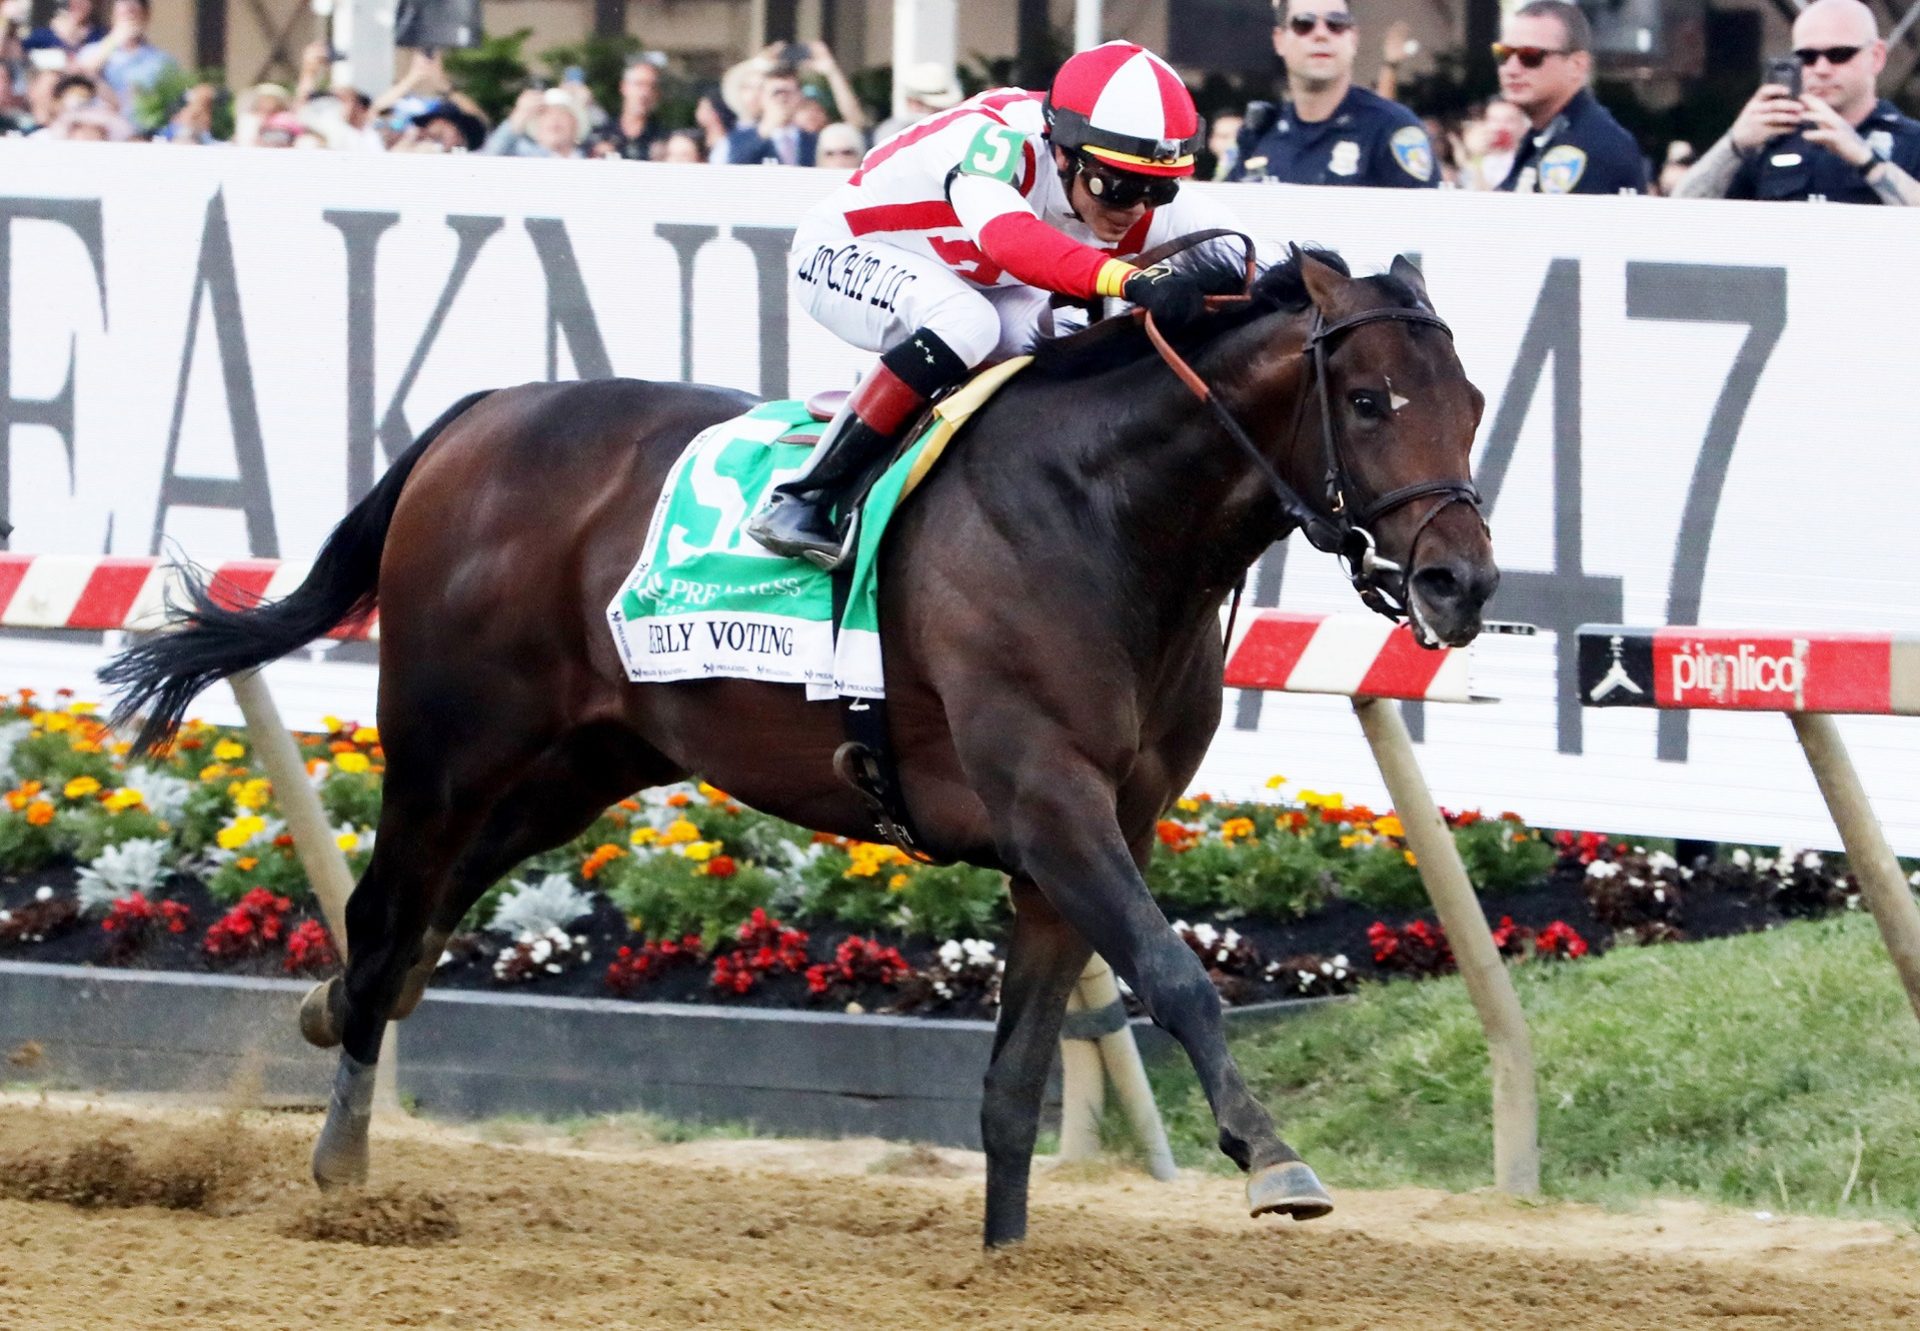 Early Voting Winning The G1 Preakness